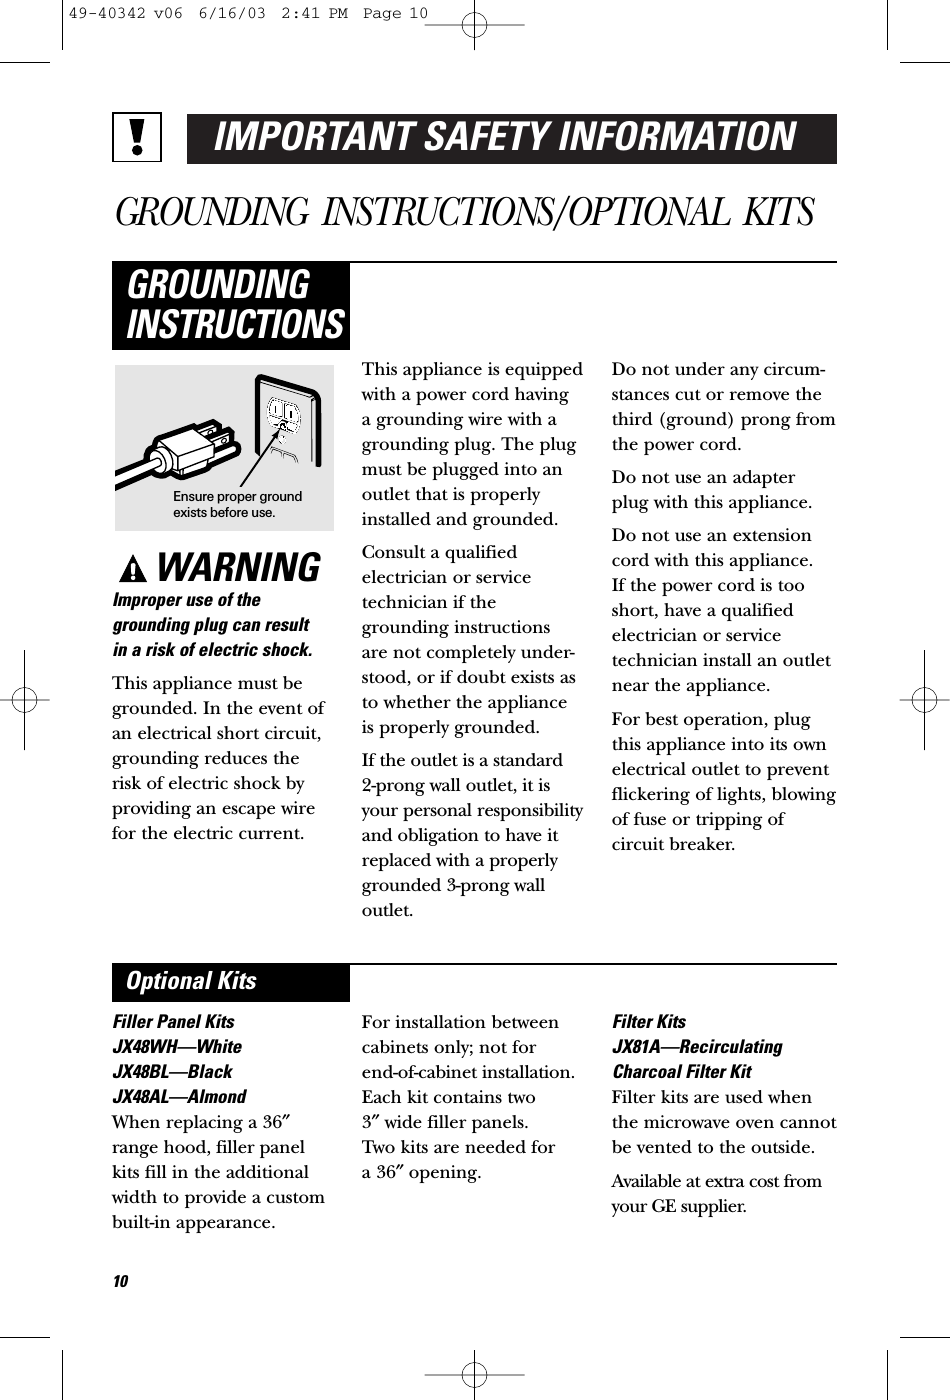 IMPORTANT SAFETY INFORMATIONGROUNDING INSTRUCTIONS/OPTIONAL KITSWARNINGImproper use of thegrounding plug can result in a risk of electric shock.This appliance must begrounded. In the event ofan electrical short circuit,grounding reduces the risk of electric shock byproviding an escape wirefor the electric current. This appliance is equippedwith a power cord having a grounding wire with agrounding plug. The plugmust be plugged into anoutlet that is properlyinstalled and grounded.Consult a qualifiedelectrician or servicetechnician if thegrounding instructions are not completely under-stood, or if doubt exists asto whether the appliance is properly grounded.If the outlet is a standard 2-prong wall outlet, it isyour personal responsibilityand obligation to have itreplaced with a properlygrounded 3-prong walloutlet.Do not under any circum-stances cut or remove thethird (ground) prong fromthe power cord.Do not use an adapter plug with this appliance.Do not use an extensioncord with this appliance. If the power cord is tooshort, have a qualifiedelectrician or servicetechnician install an outletnear the appliance.For best operation, plugthis appliance into its ownelectrical outlet to preventflickering of lights, blowingof fuse or tripping ofcircuit breaker.GROUNDINGINSTRUCTIONSFiller Panel KitsJX48WH—WhiteJX48BL—BlackJX48AL—AlmondWhen replacing a 36″range hood, filler panelkits fill in the additionalwidth to provide a custombuilt-in appearance. For installation betweencabinets only; not for end-of-cabinet installation.Each kit contains two 3″wide filler panels. Two kits are needed for a 36″opening.Filter KitsJX81A—RecirculatingCharcoal Filter KitFilter kits are used whenthe microwave oven cannotbe vented to the outside.Available at extra cost fromyour GE supplier.Optional KitsEnsure proper groundexists before use.1049-40342 v06  6/16/03  2:41 PM  Page 10